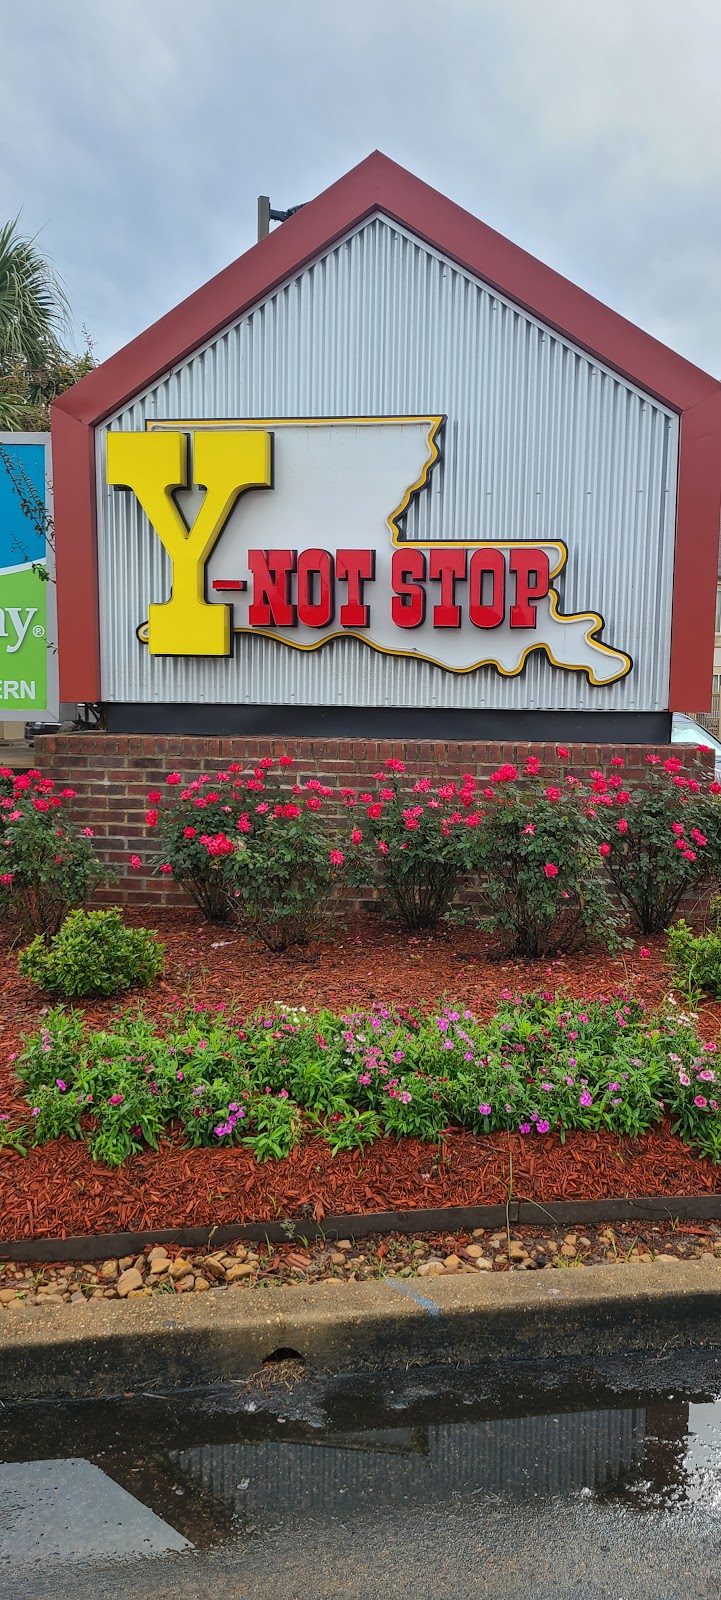 Y-Not Stop Airpark | restaurant | 6019 Old Boyce Rd, Alexandria, LA 71303, USA | 3184420906 OR +1 318-442-0906